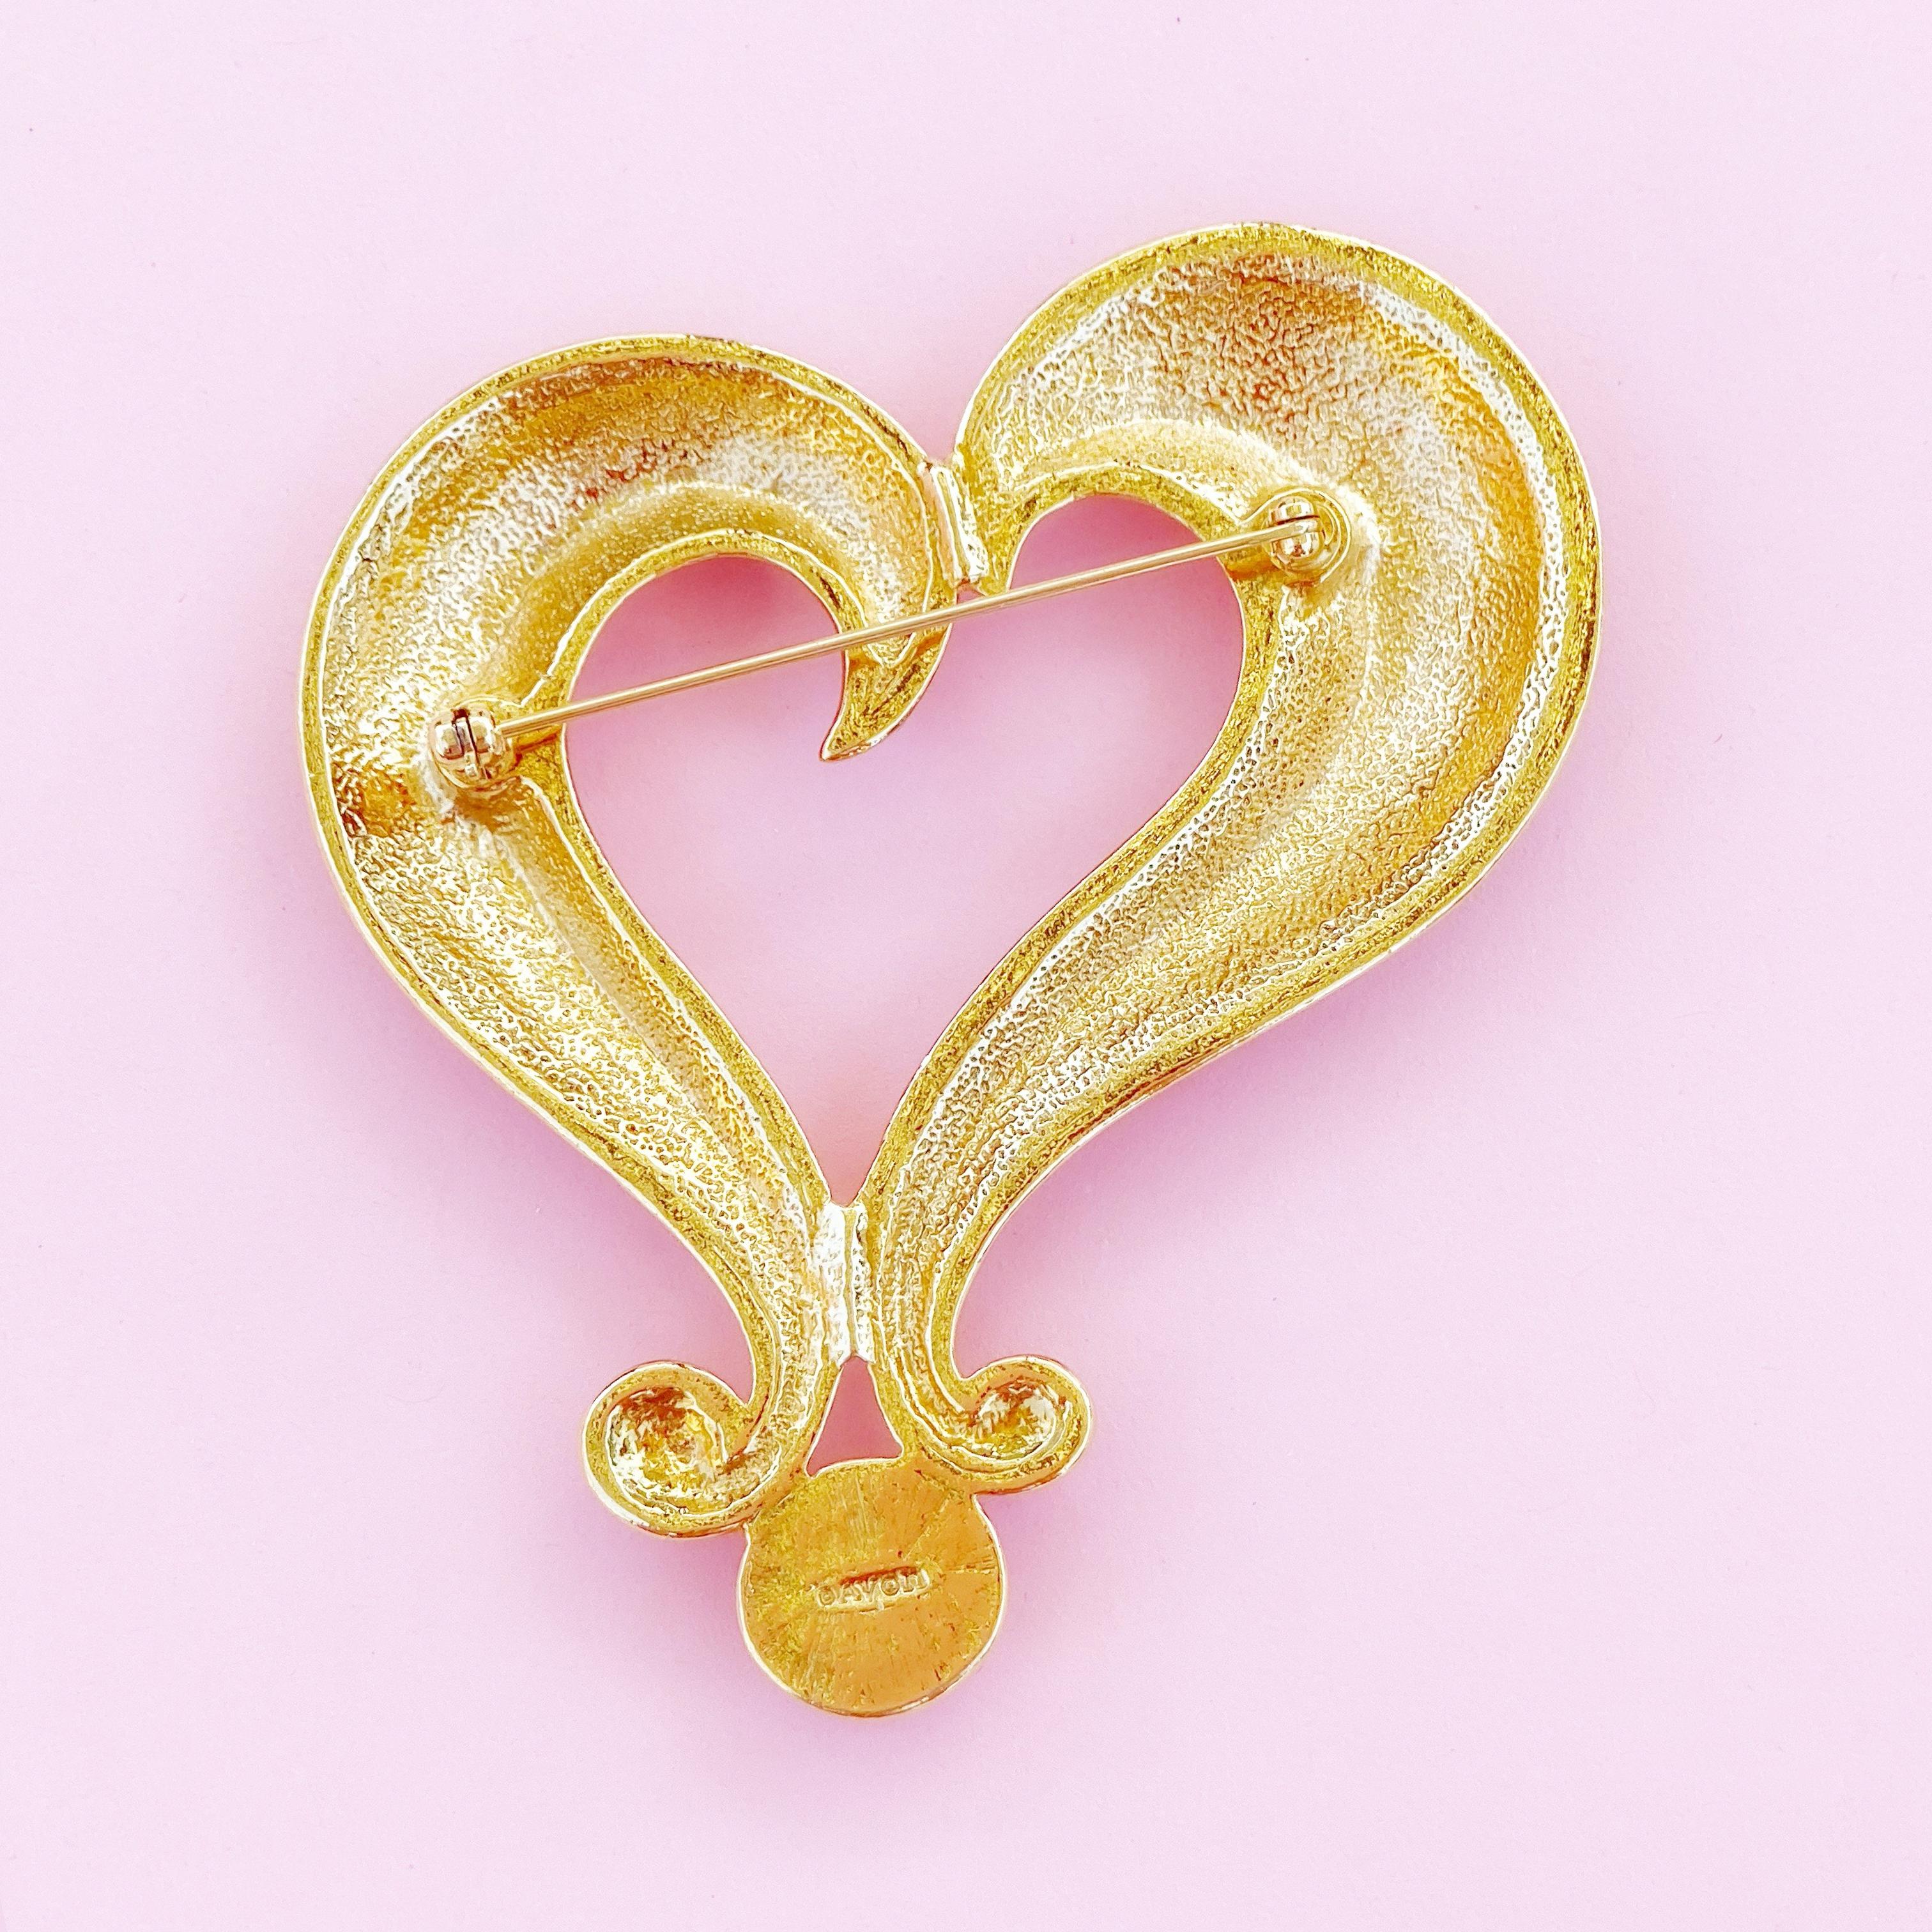 Vintage Oversized Gilded Heart Figural Brooch By Avon, 1980s 1